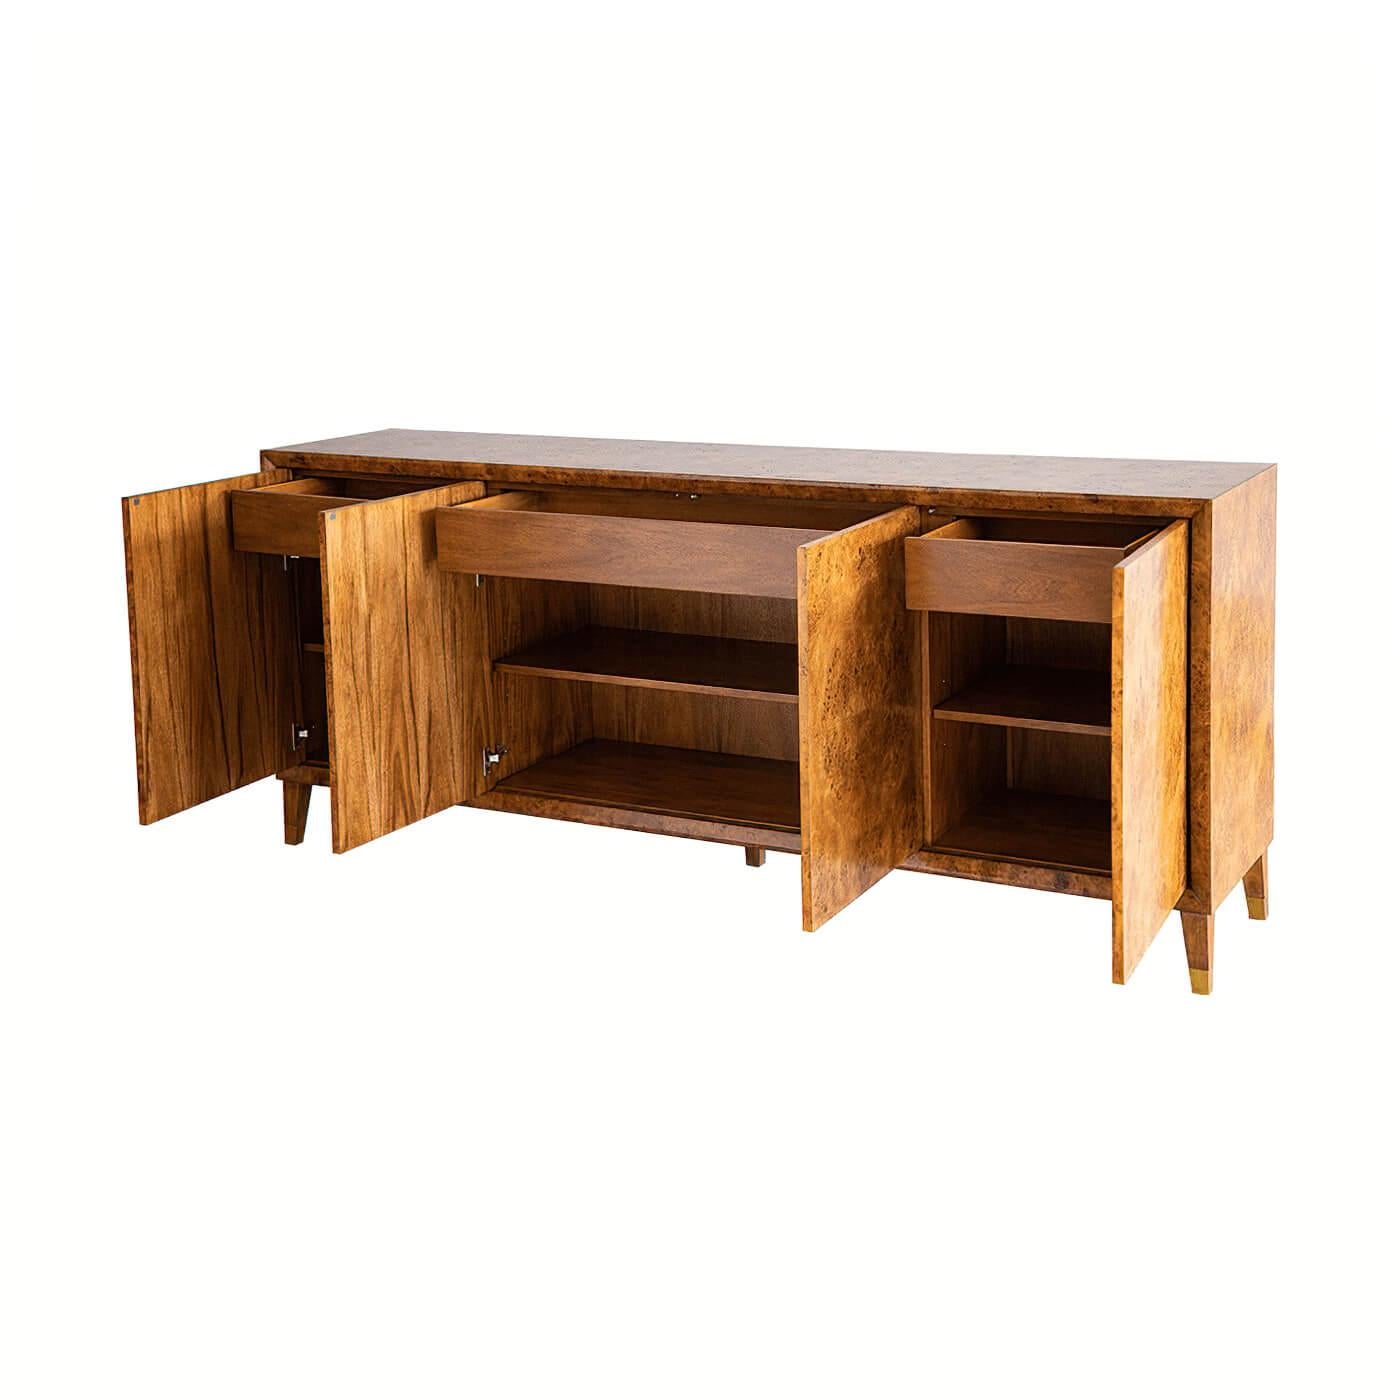 Modern burl buffet sideboard with four doors framed by a beveled edge, with interior drawers and shelves and finished in a lightly distressed rustic warm hand-rubbed finish.
Dimensions: 84